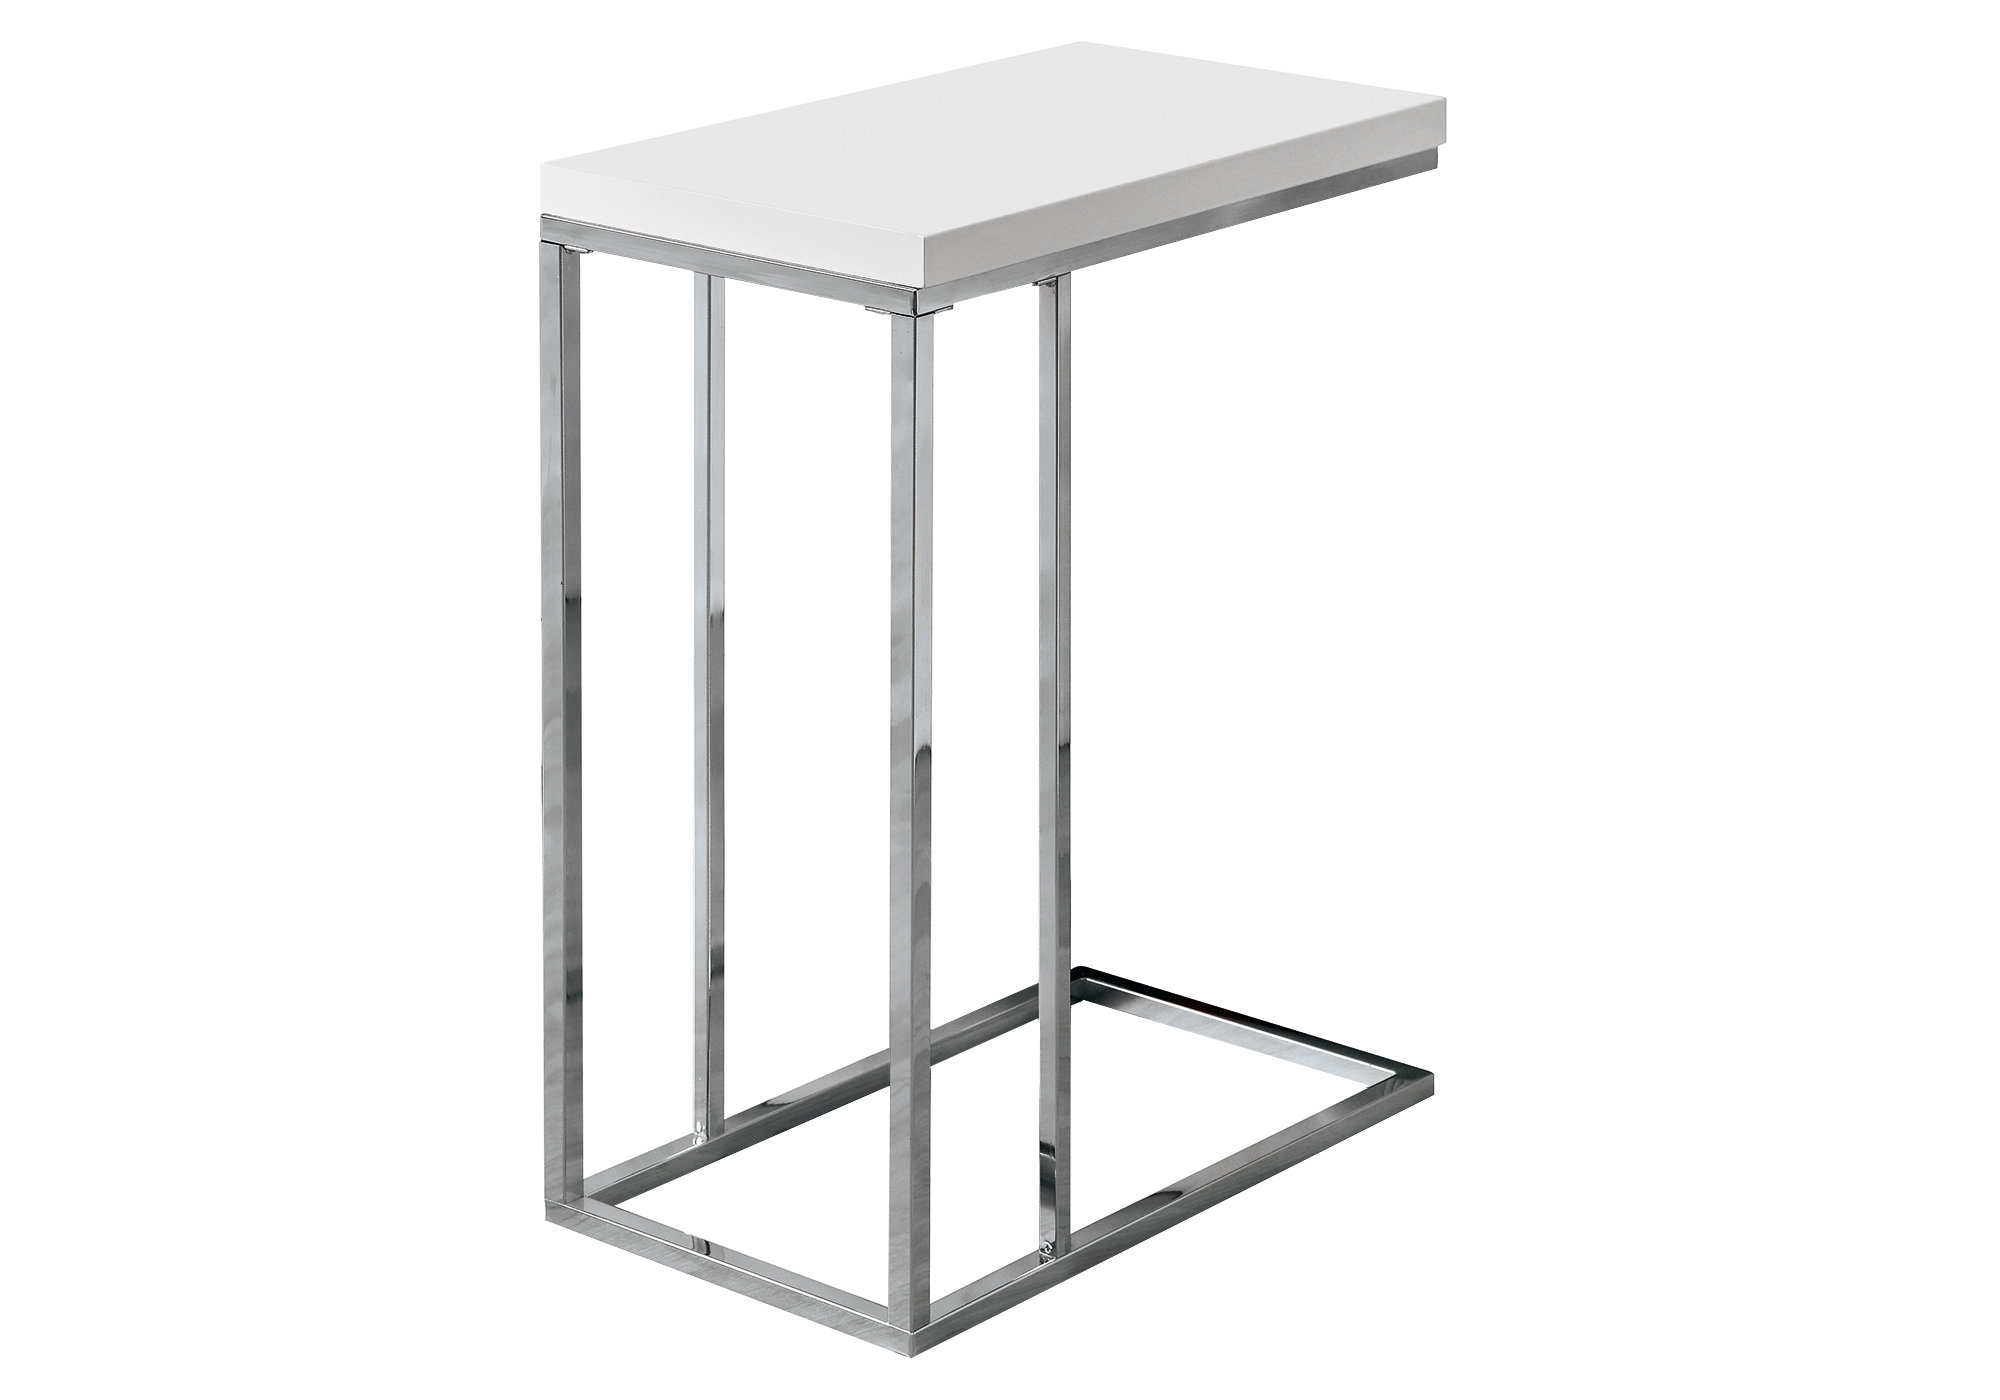 18.25" x 10.25" x 25.25" White Particle Board Metal Accent Table